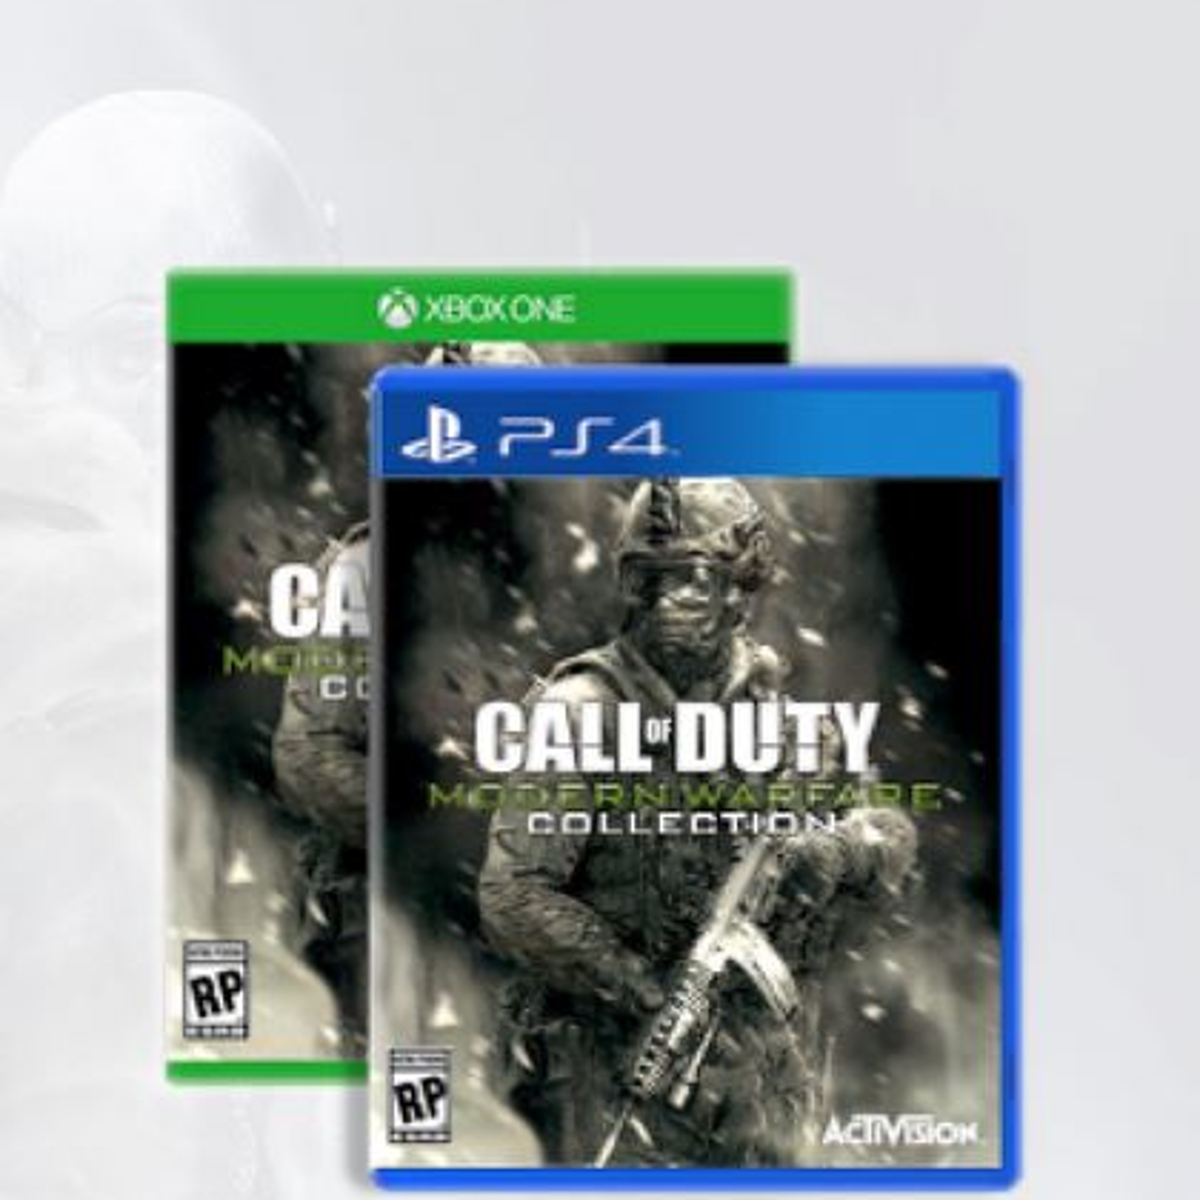 This of Duty: Modern Warfare Collection PS4 One image appeared | VG247